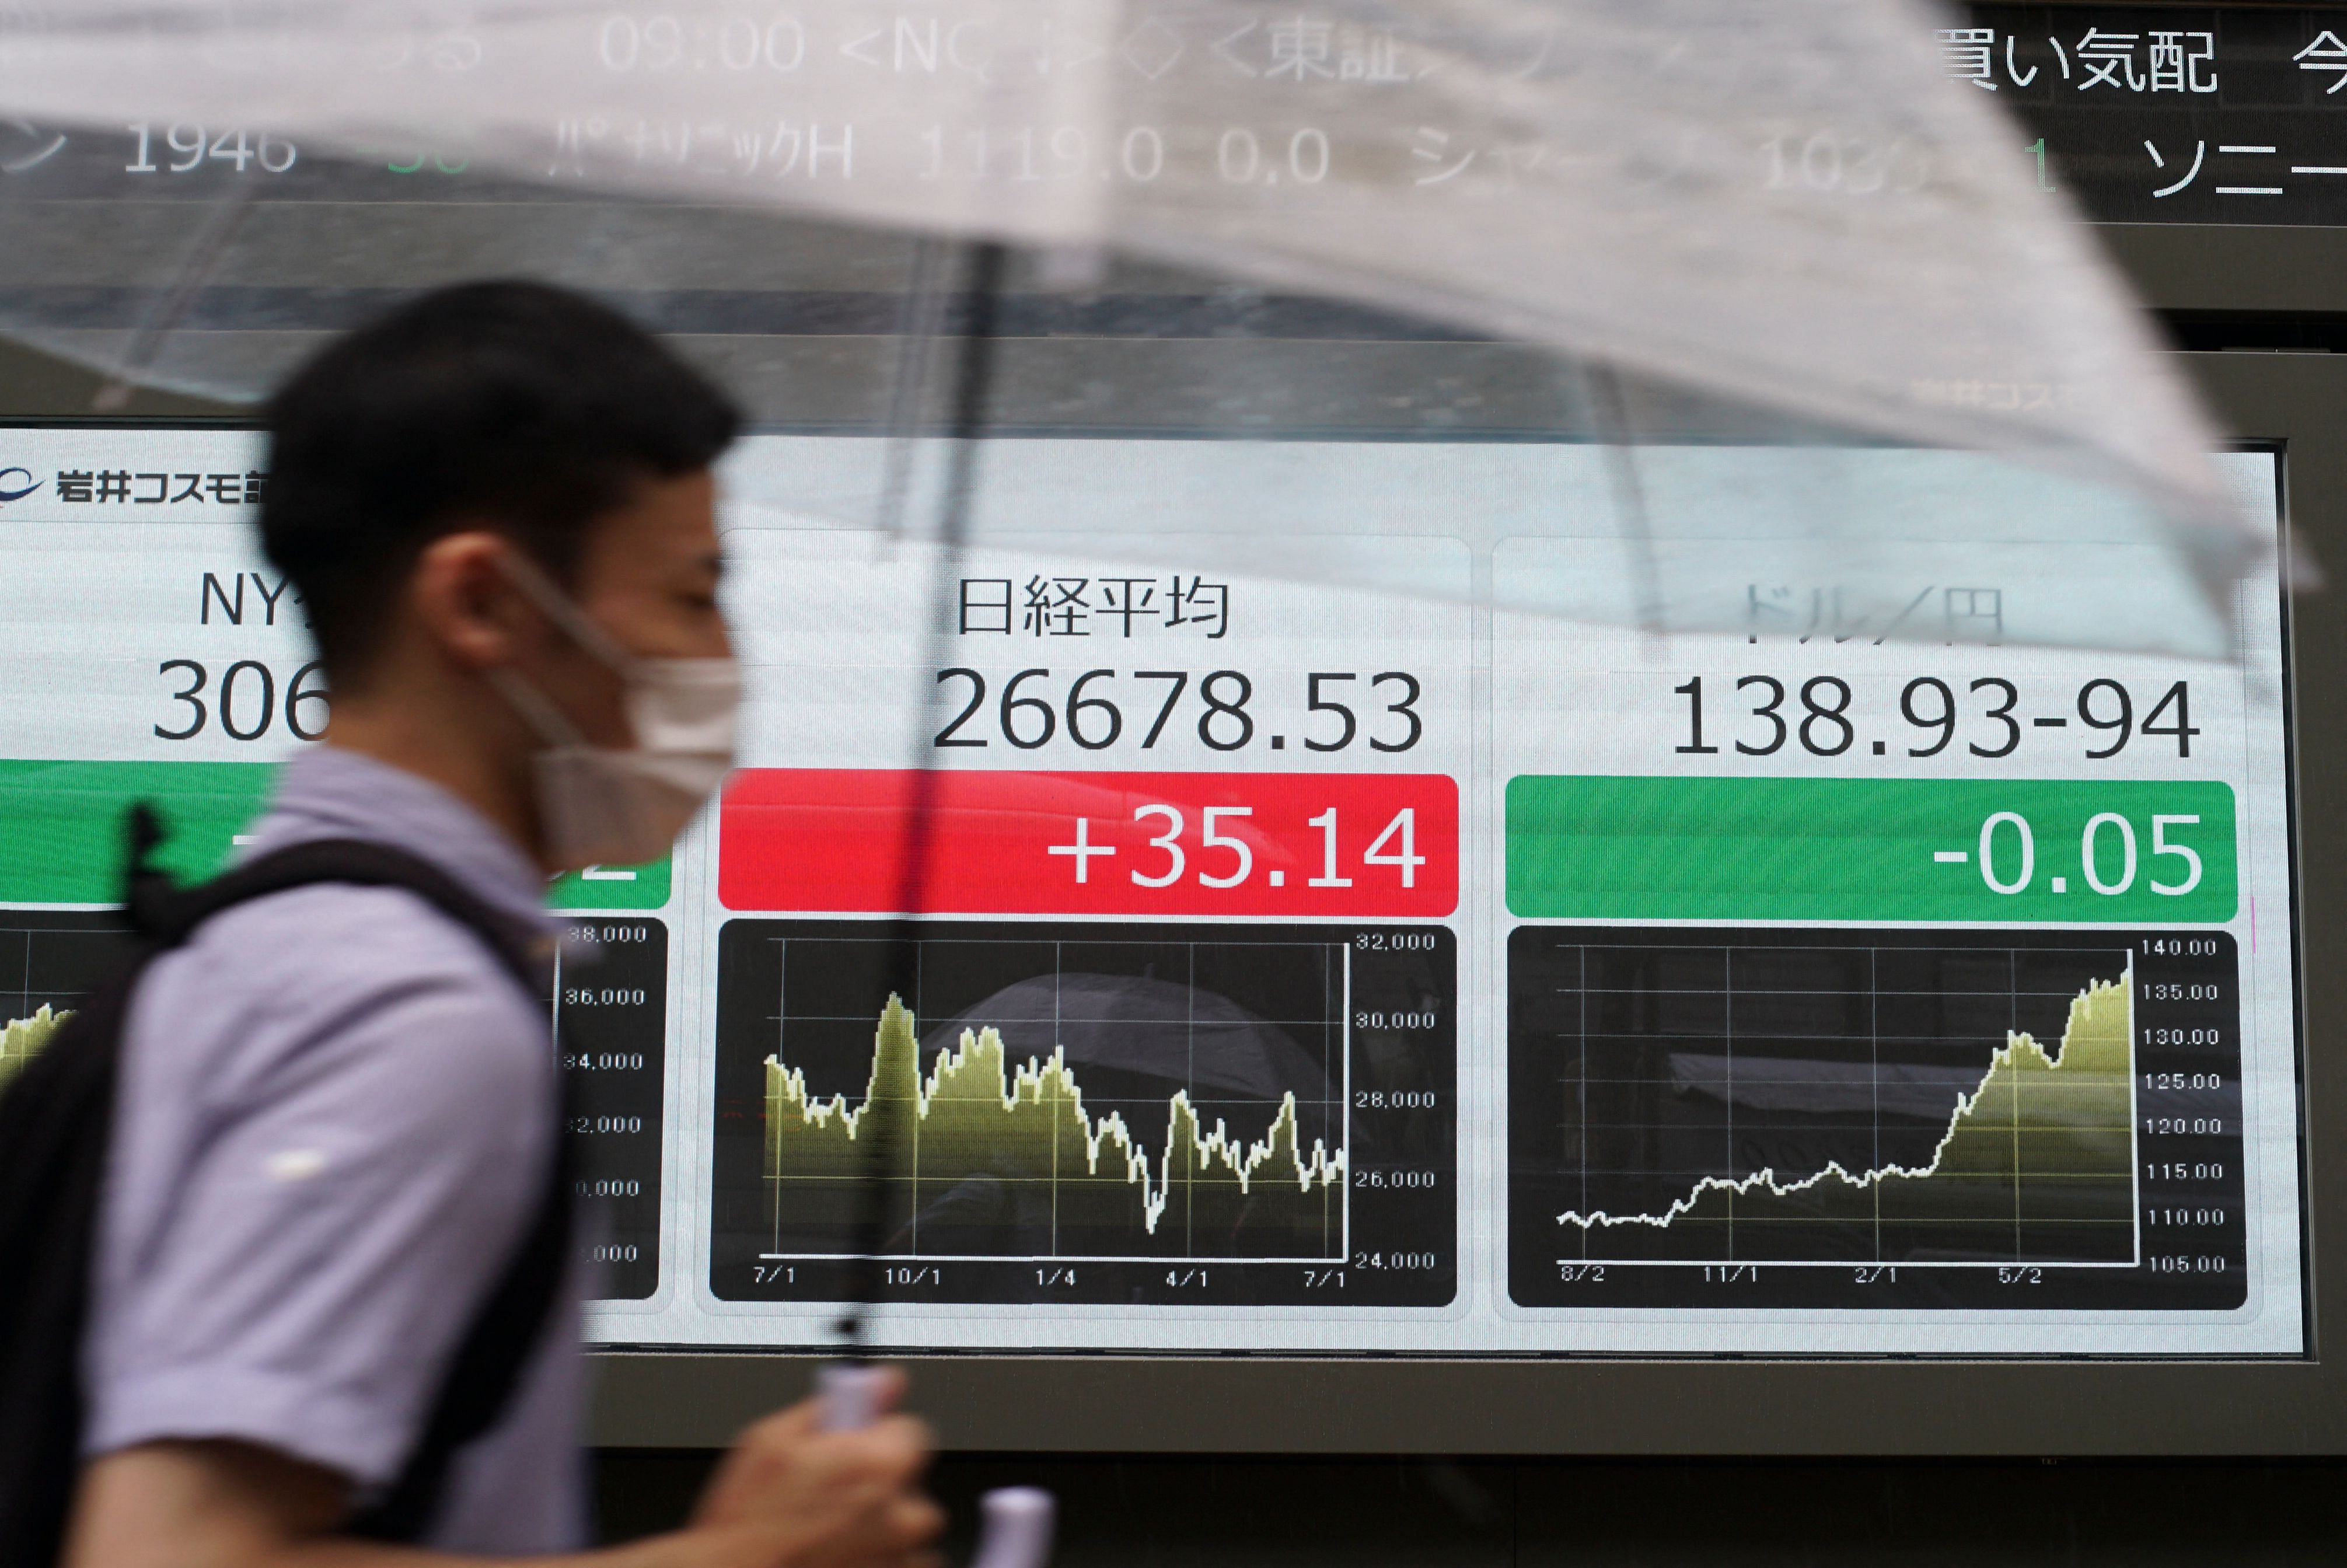 A man walks past an electronic share price board showing the numbers on the Tokyo Stock Exchange (L) and a foreign exchange board showing the yen's rate against the US dollar (R) in Tokyo. Credit: AFP Photo